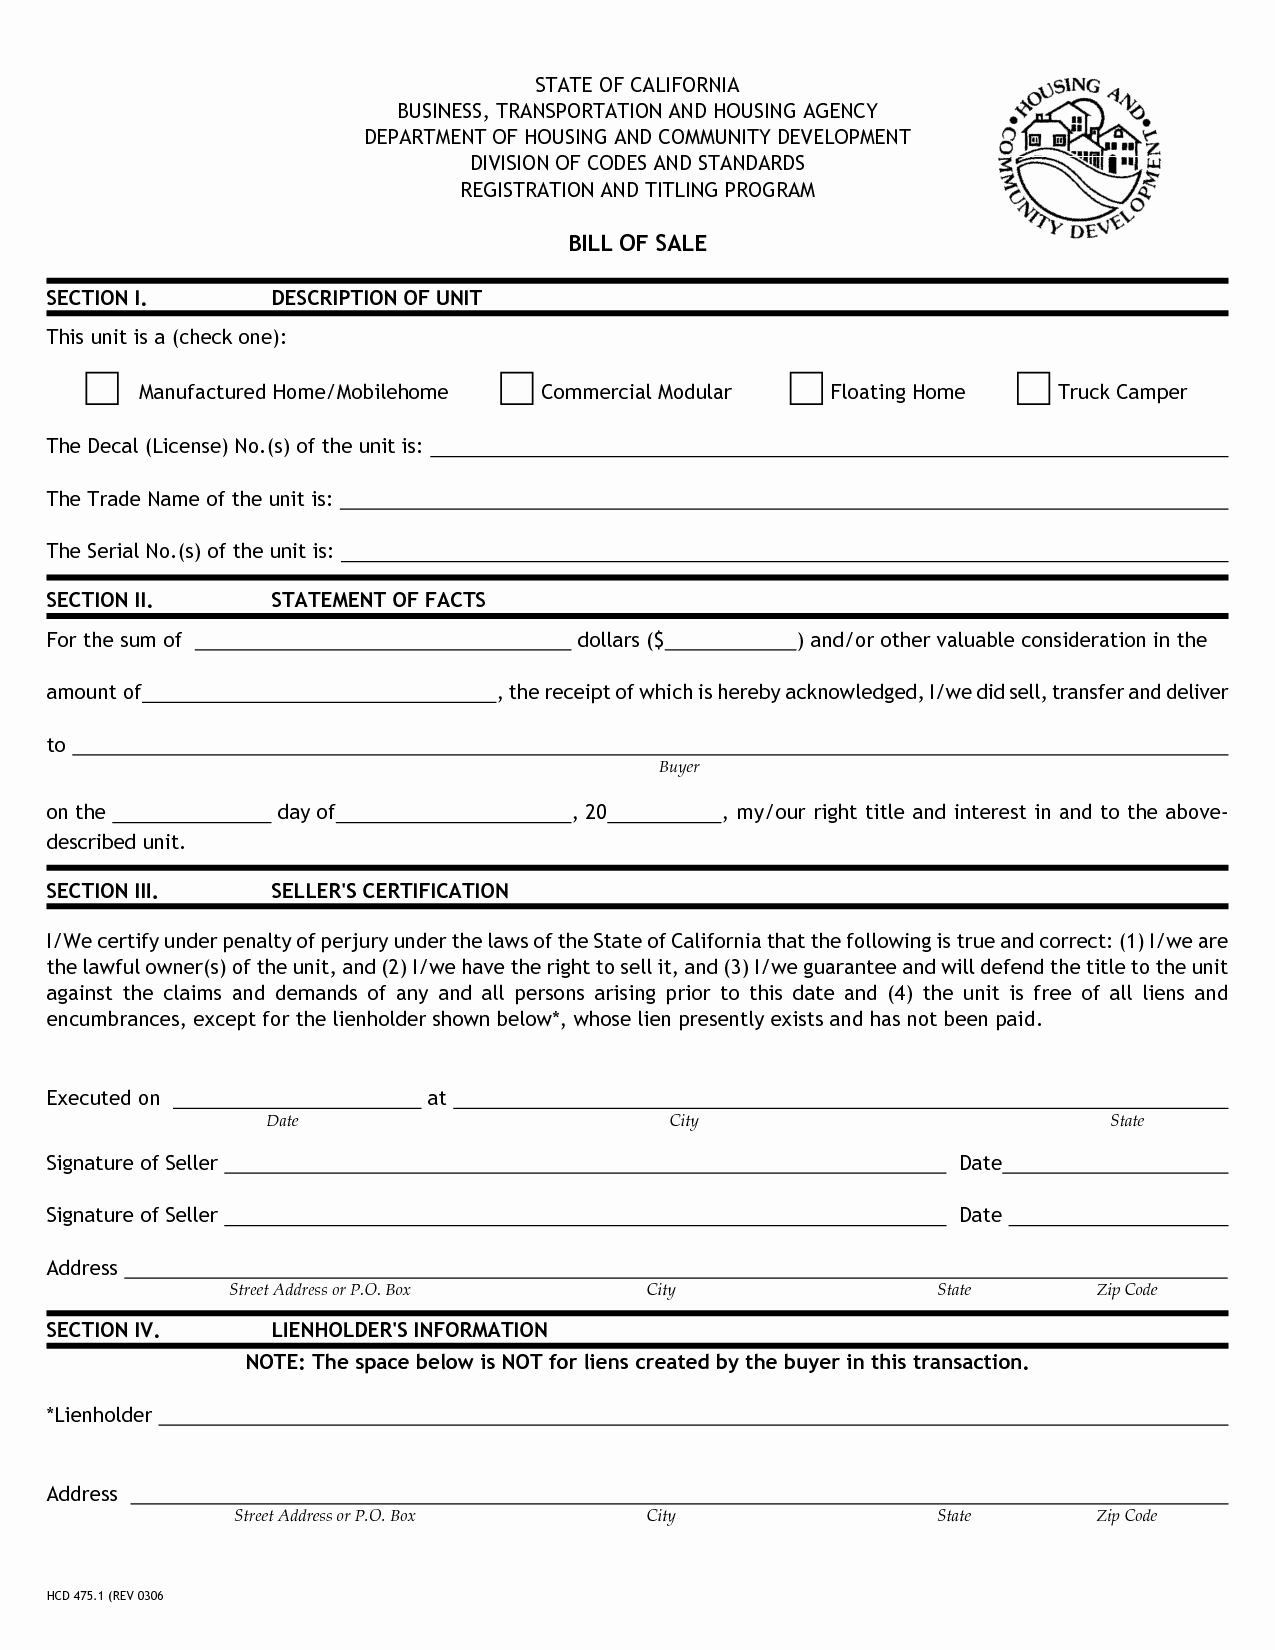 Bill Of Sale Trailer New Free Printable Bill Of Sale for Rv form Generic